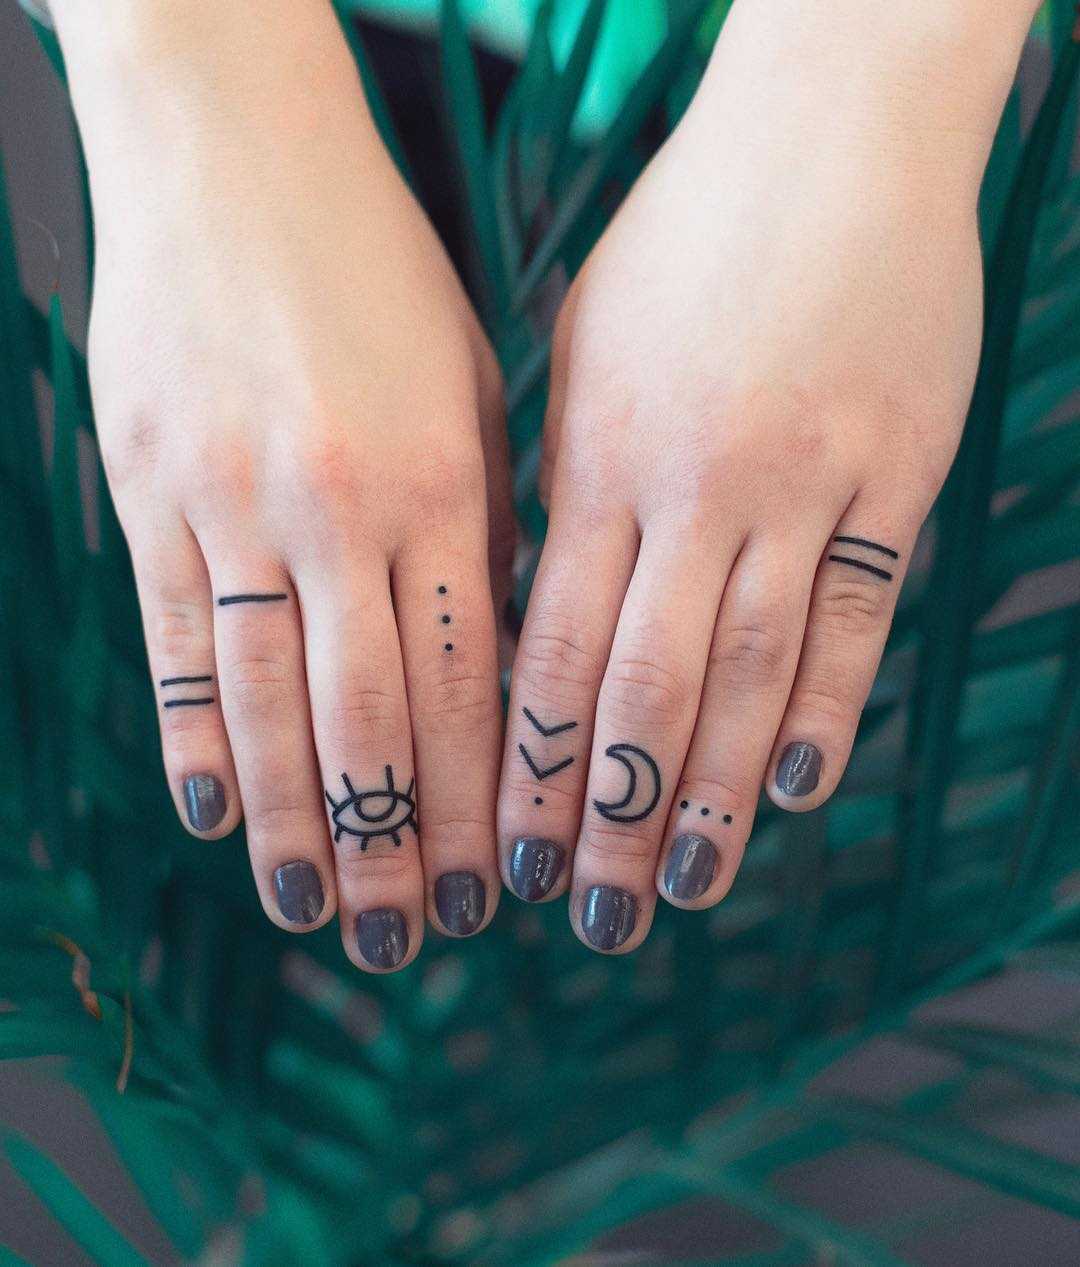 Hand and Finger Tattoos: Cute and Minimalist Designs